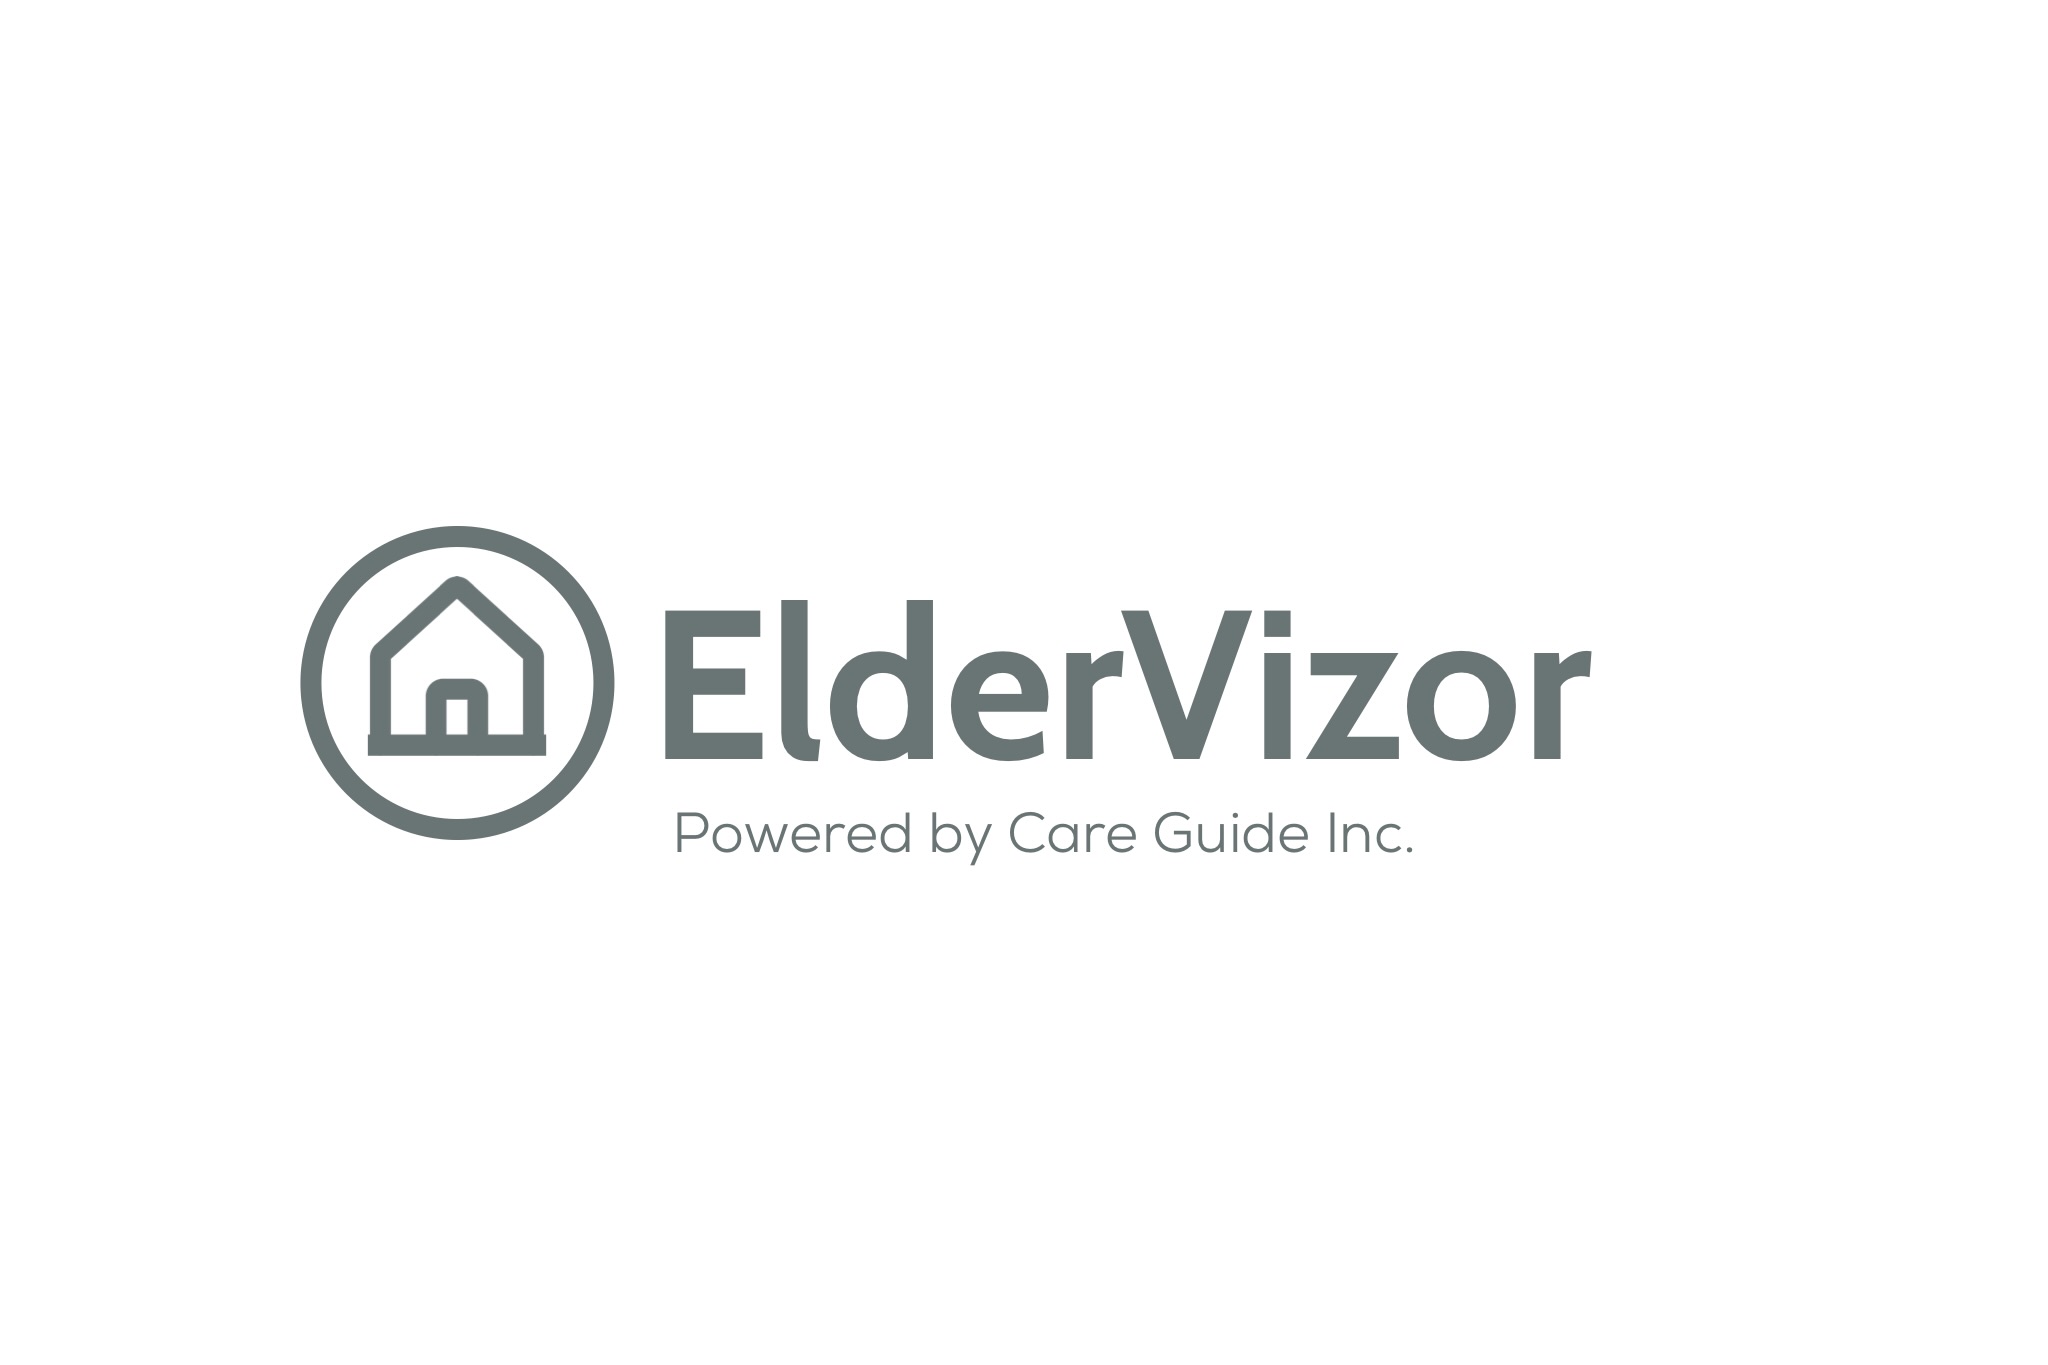 ElderVizor, Powered by Care Guide, Inc.